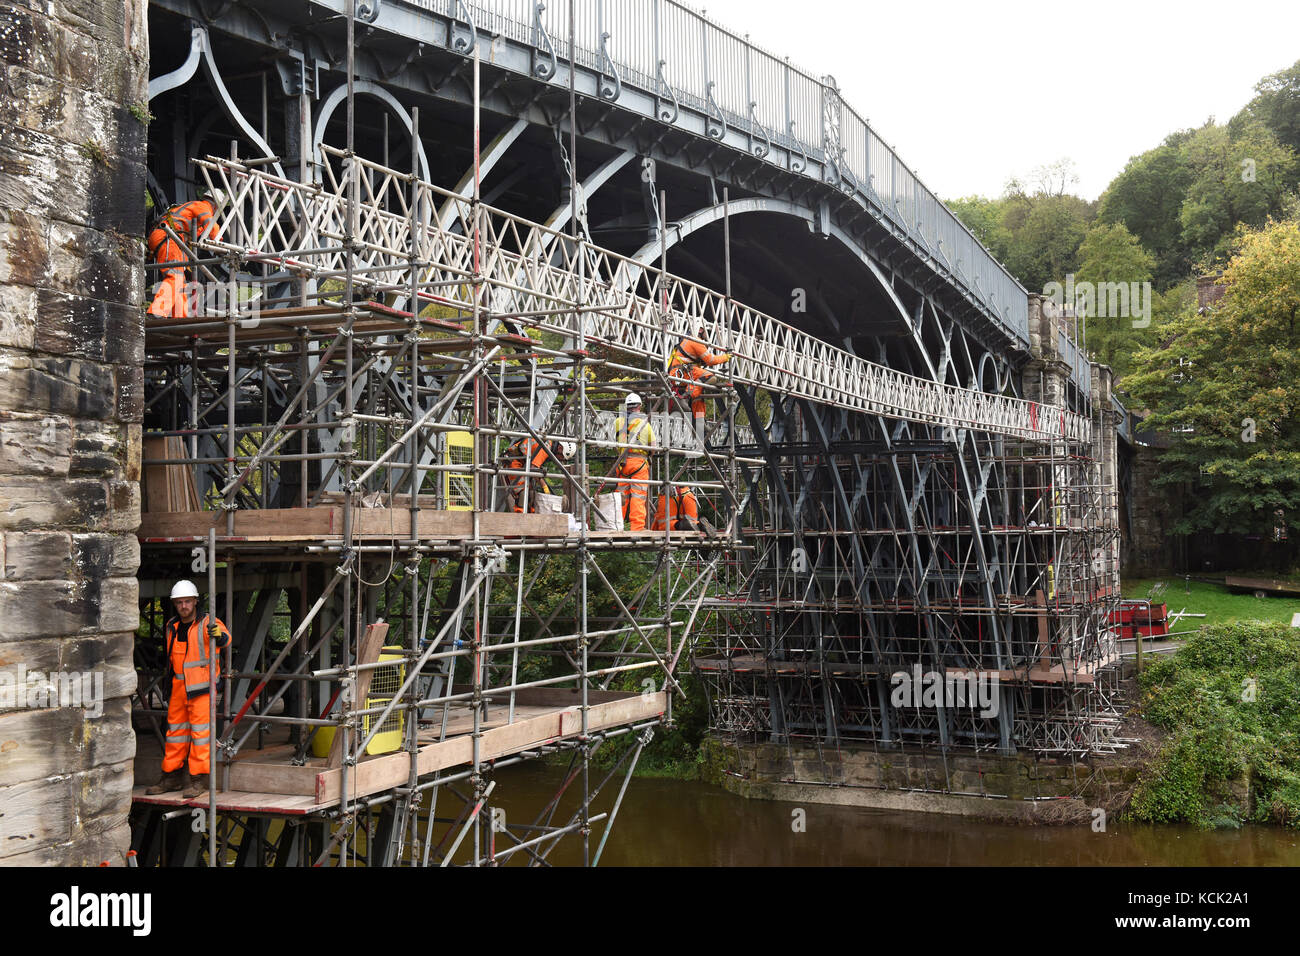 Ironbridge, Shropshire, UK. 06th Oct, 2017. The world's oldest iron bridge undergoing a £1.2 million conservation makeover due to stresses in the ironwork. the project, the largest of its kind by English Heritage, will stop cracking on the bridge. The bridge has spanned the River Severn at Ironbridge in Shropshire since it was completed in 1779 and has been a Unesco World Heritage Site in 1986. Credit: David Bagnall/Alamy Live News Stock Photo